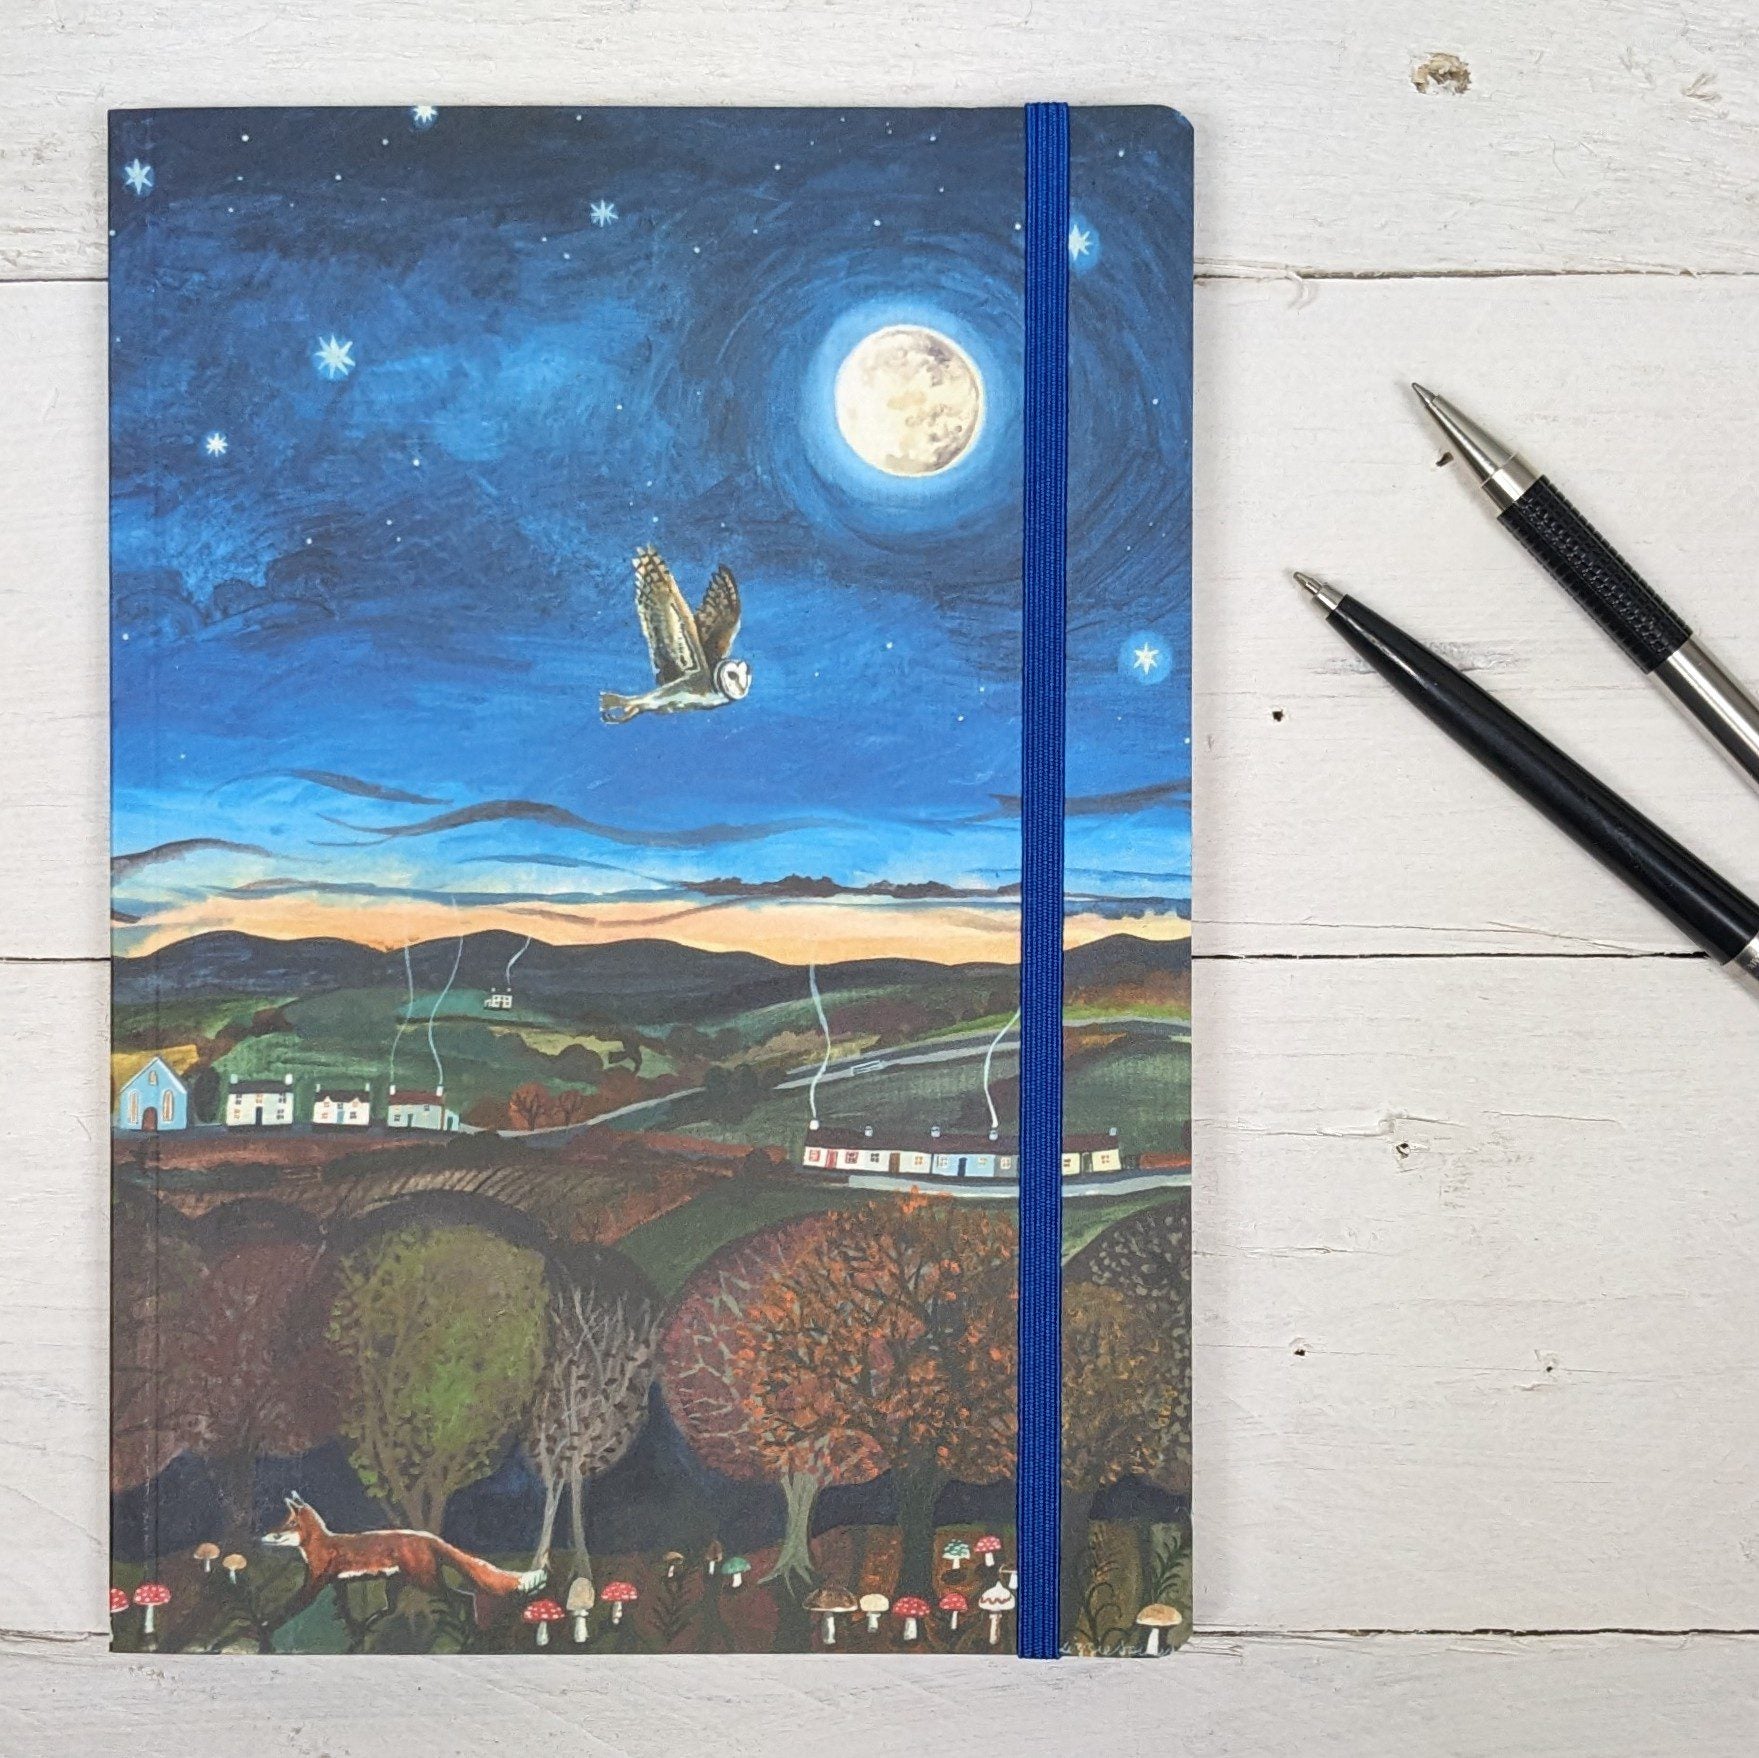 'Owls By Moonlight' Lined Notebook by Lizzie Spikes